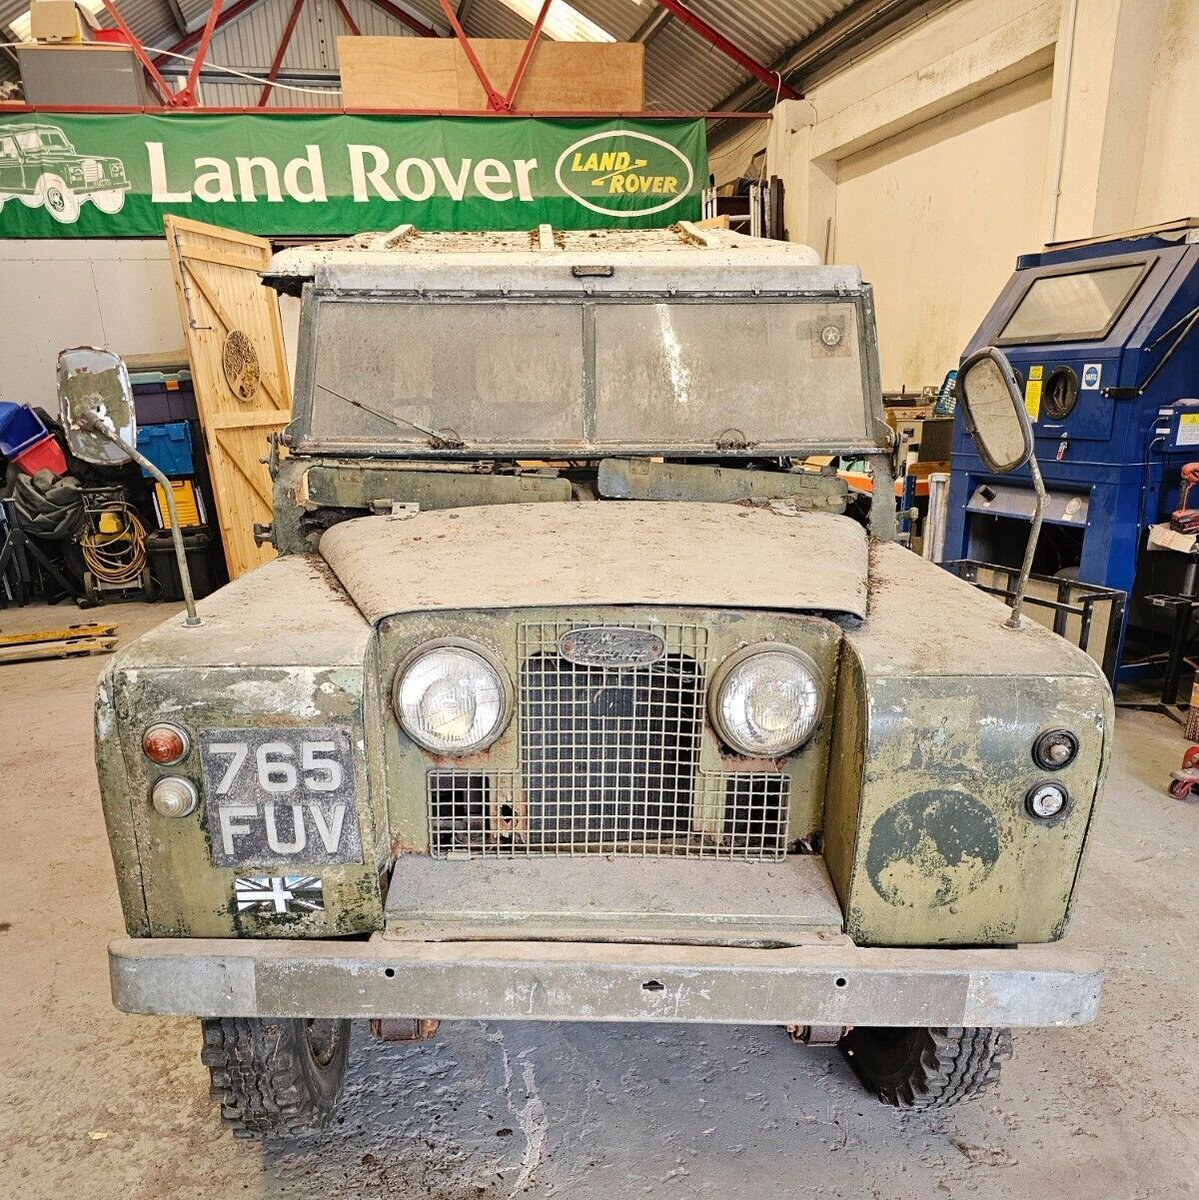 1958 Land Rover Series 2 barn find
Ad – on eBay here >> ebay.us/SgJQGu 

#landrover #barnfind #classiccar #classiccarforsale #ad